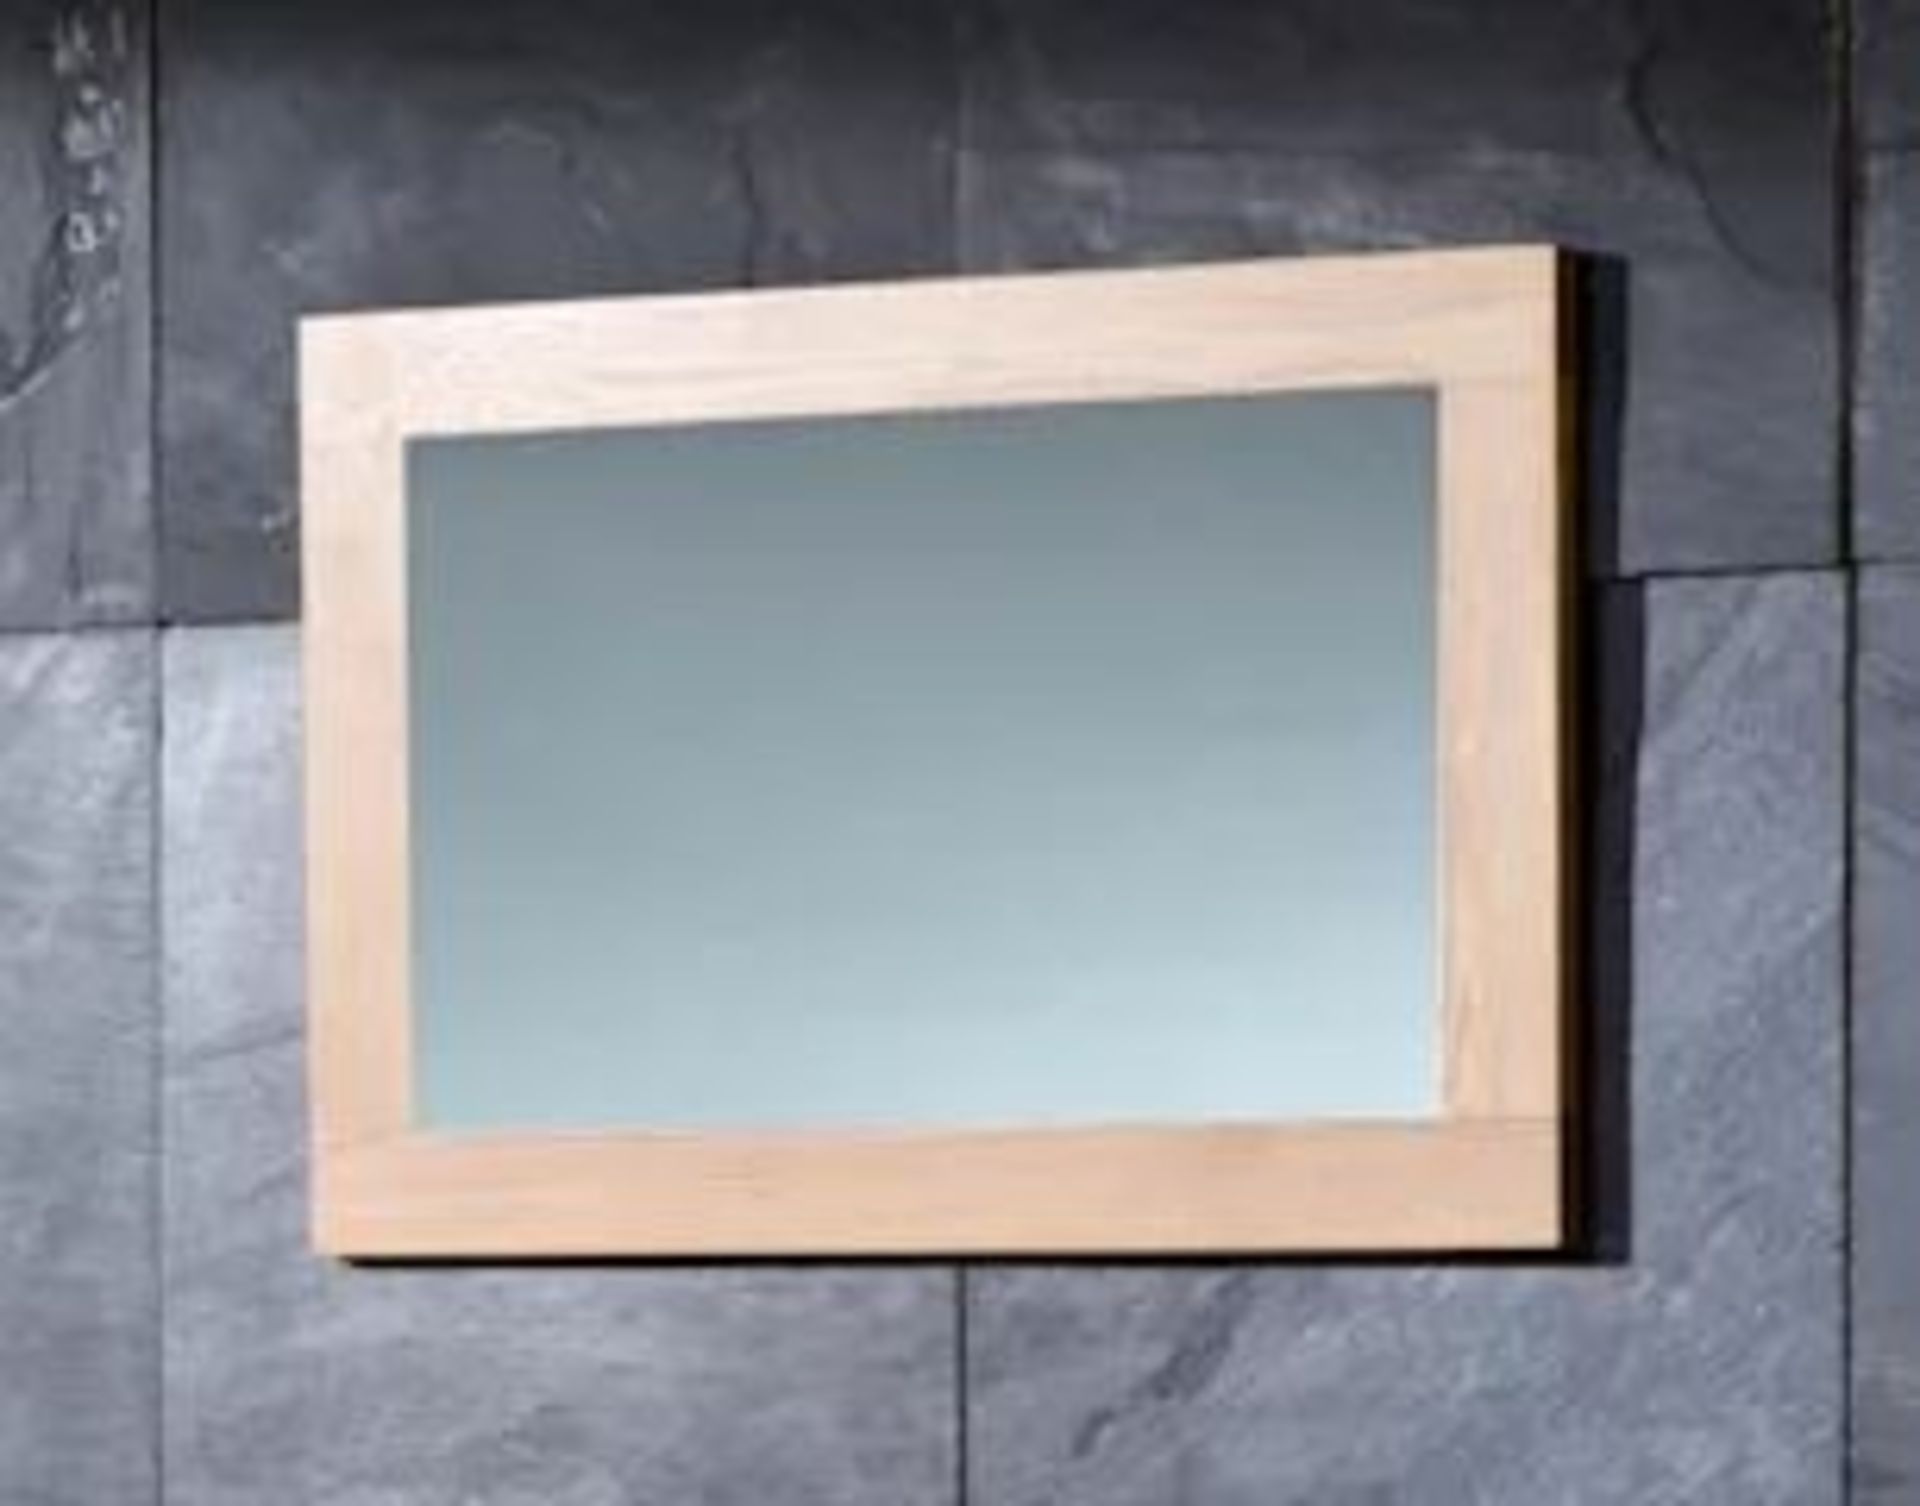 1 x Stonearth Medium Wall Mirror Frame - American Solid Oak Frame For Mirrors or Pictures - Image 9 of 12